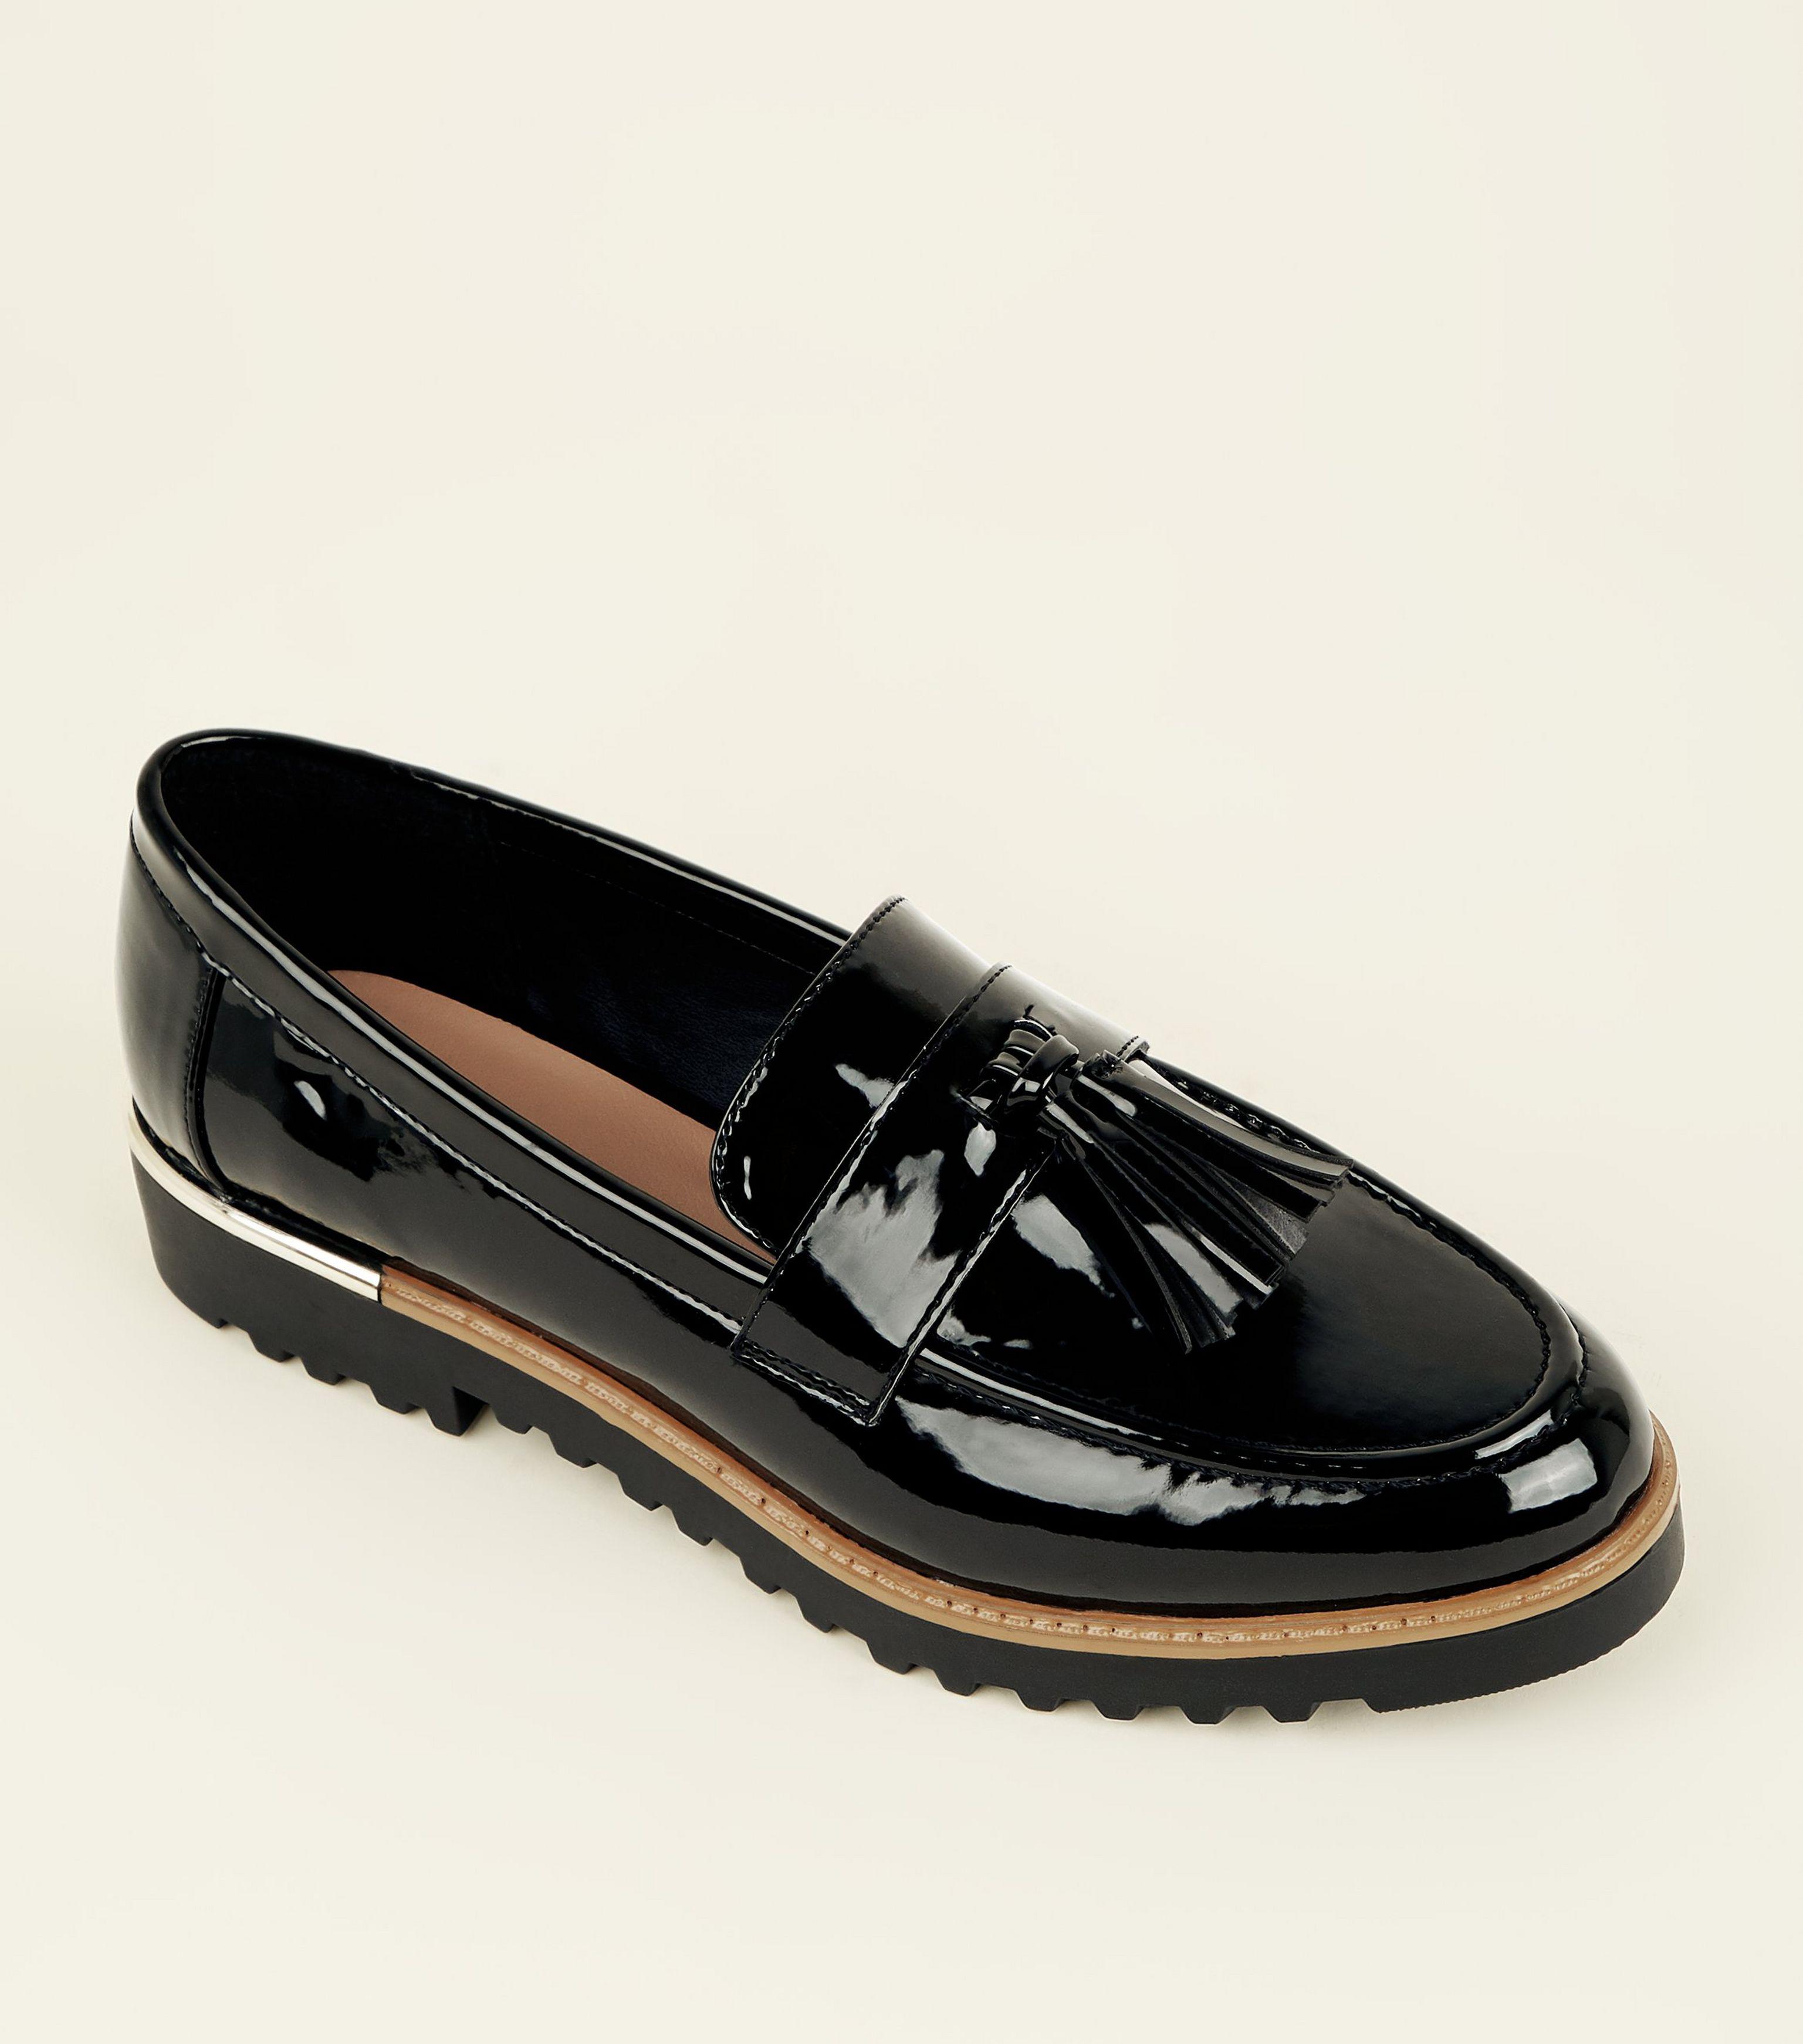 new look black patent loafers